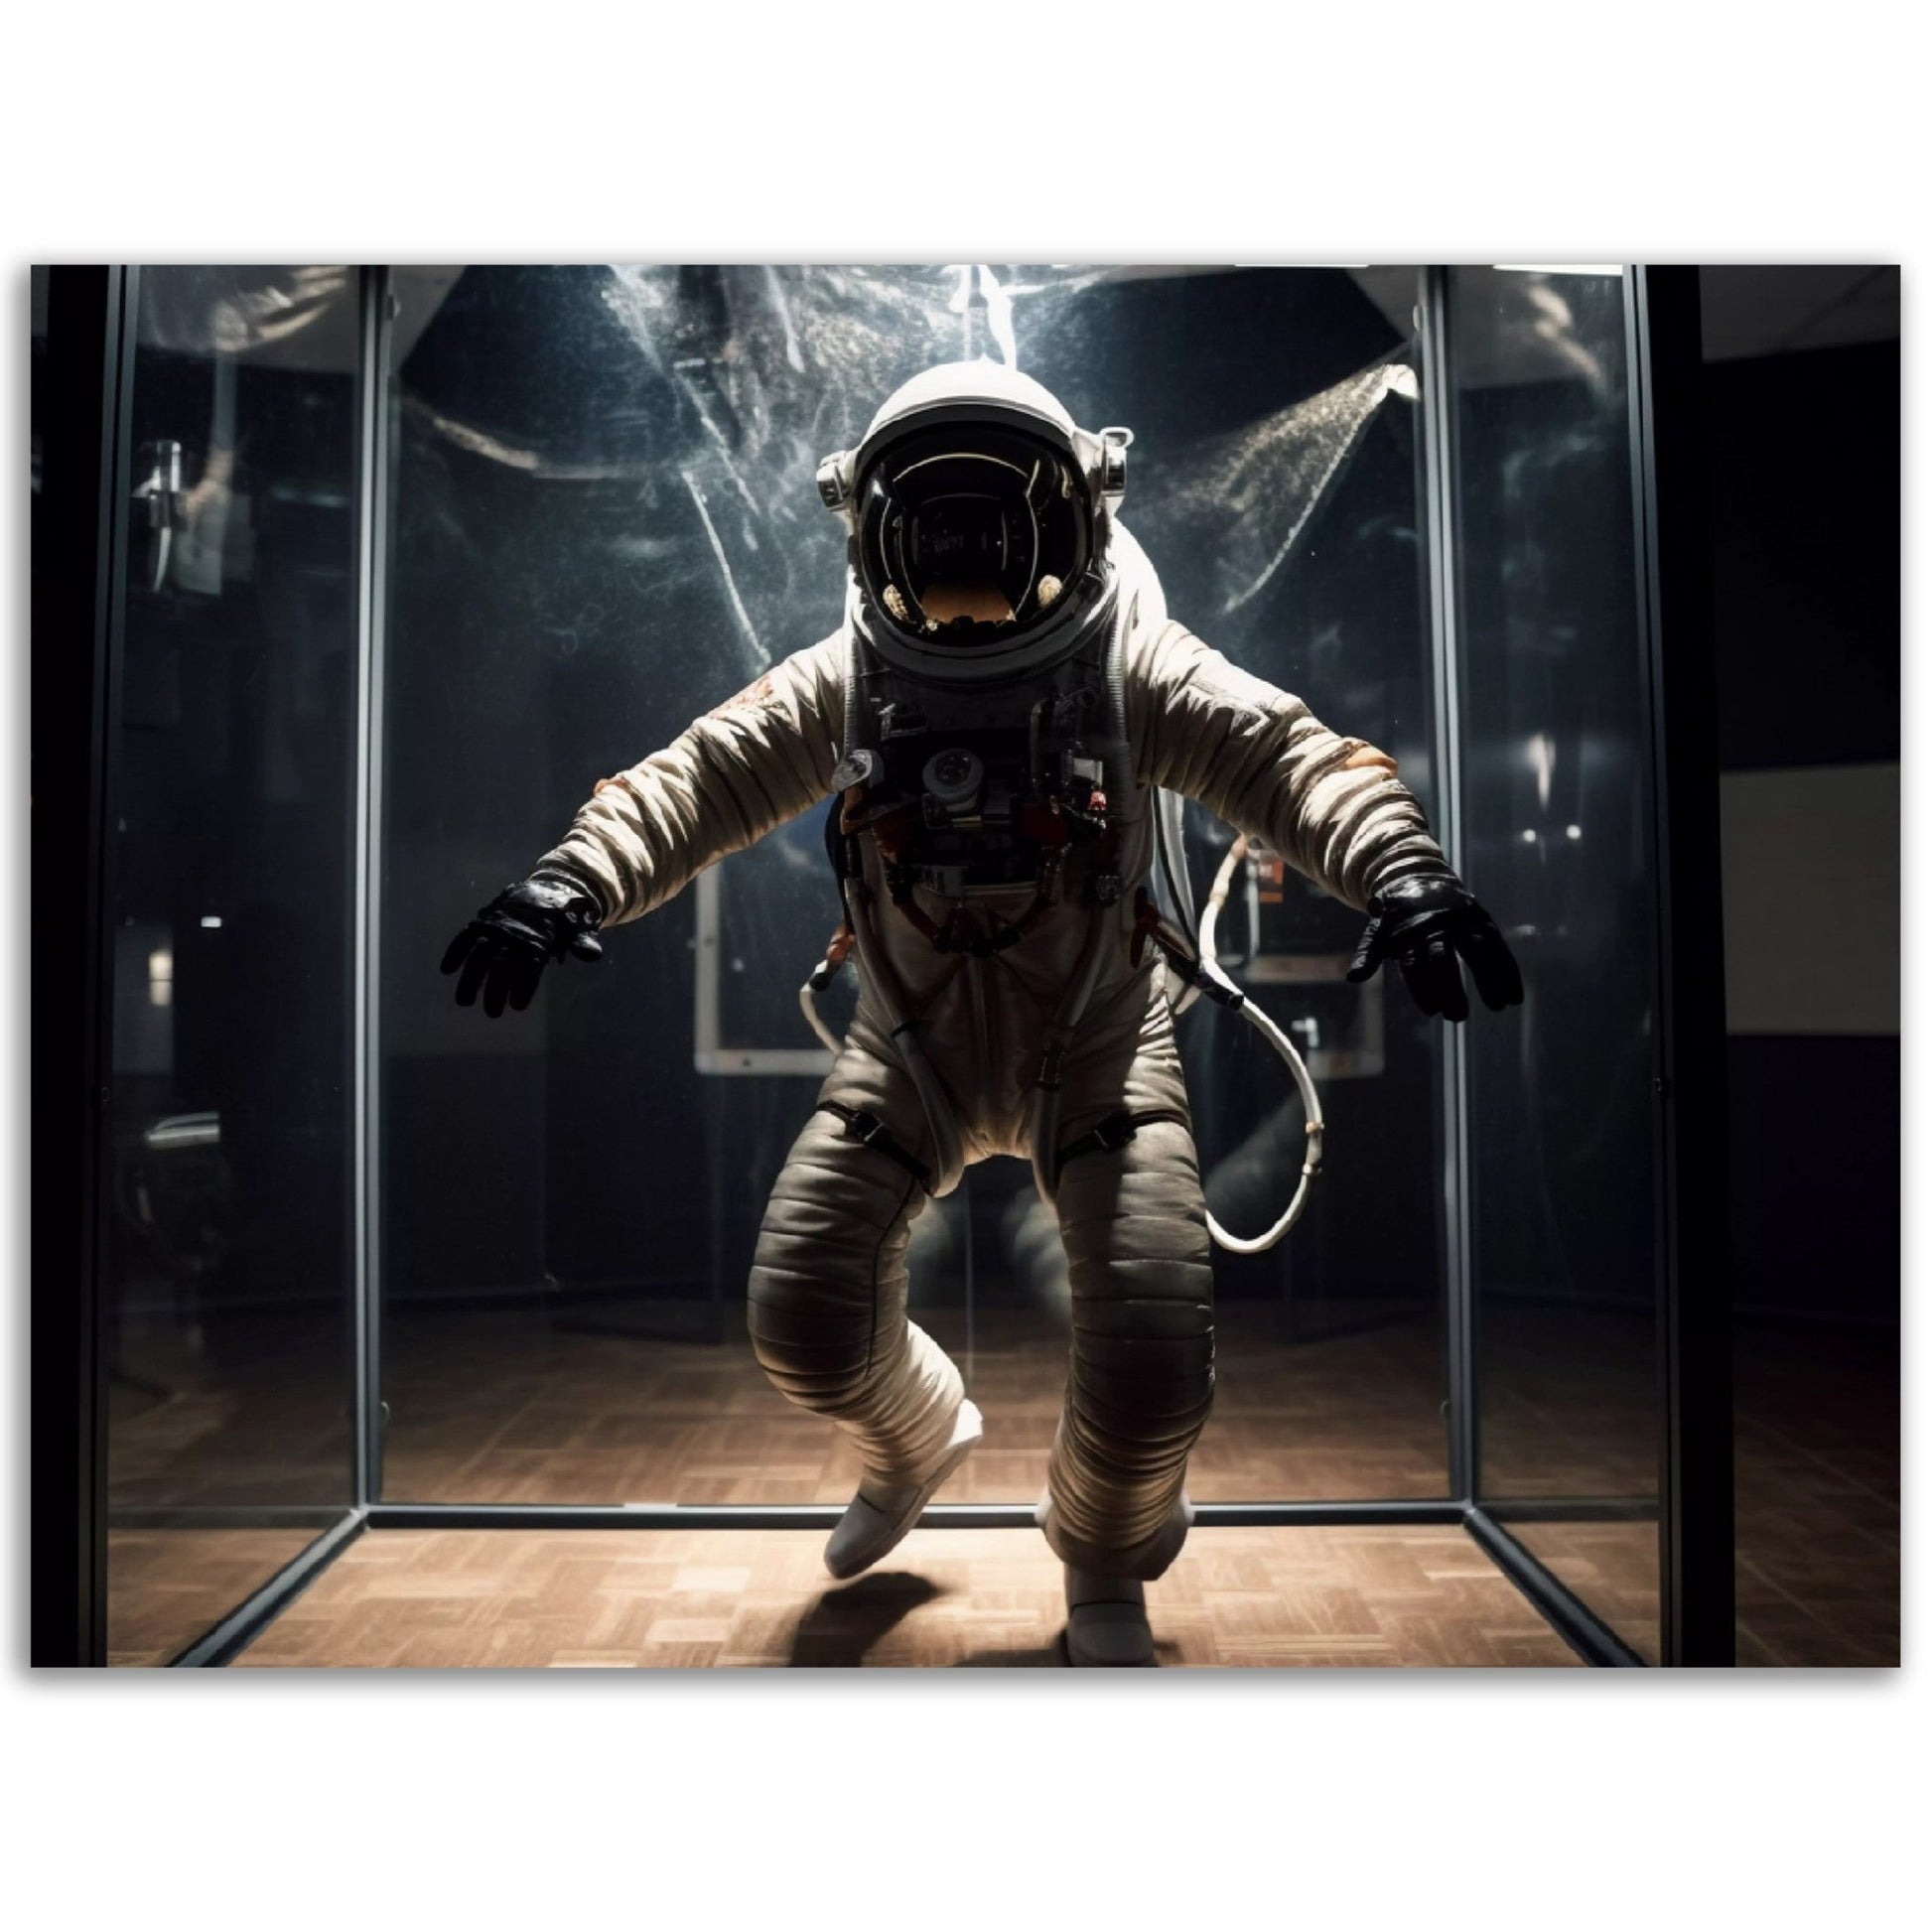 A man in an astronaut suit is surrounded by Unseen Forces wall art.